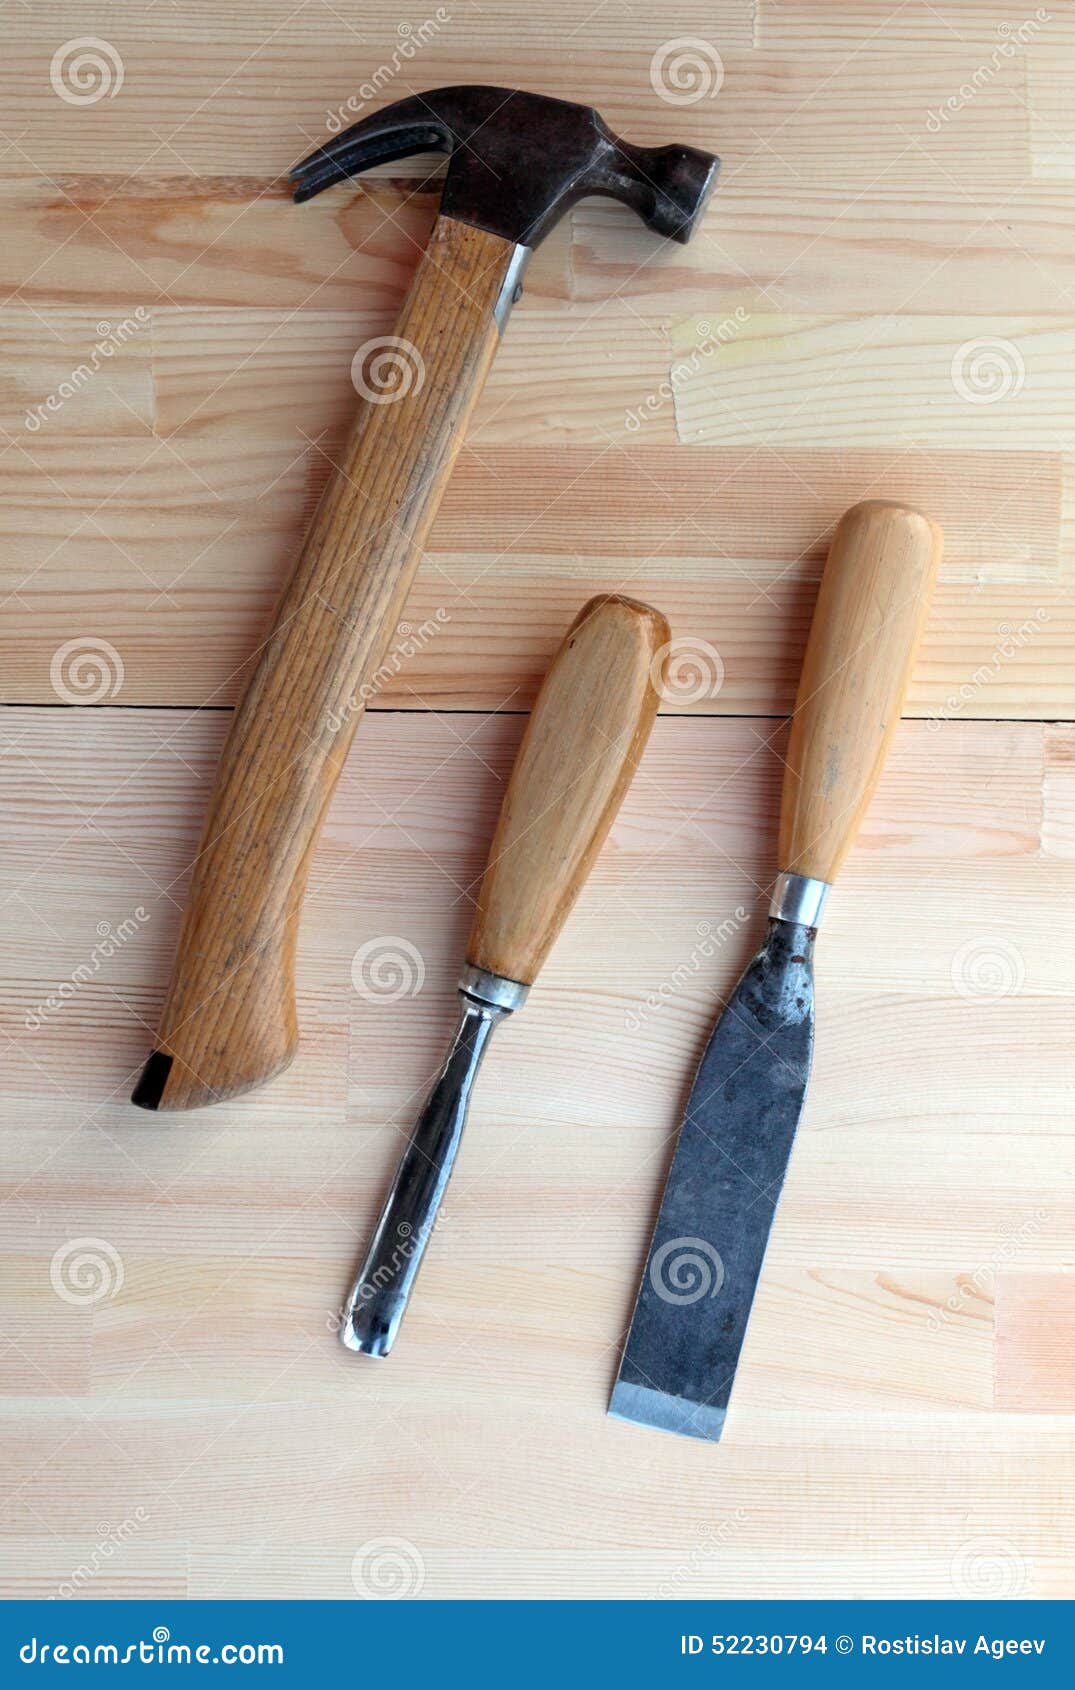 Carpenter Tools Plane, Hammer and Chisel Stock Photo - Image of